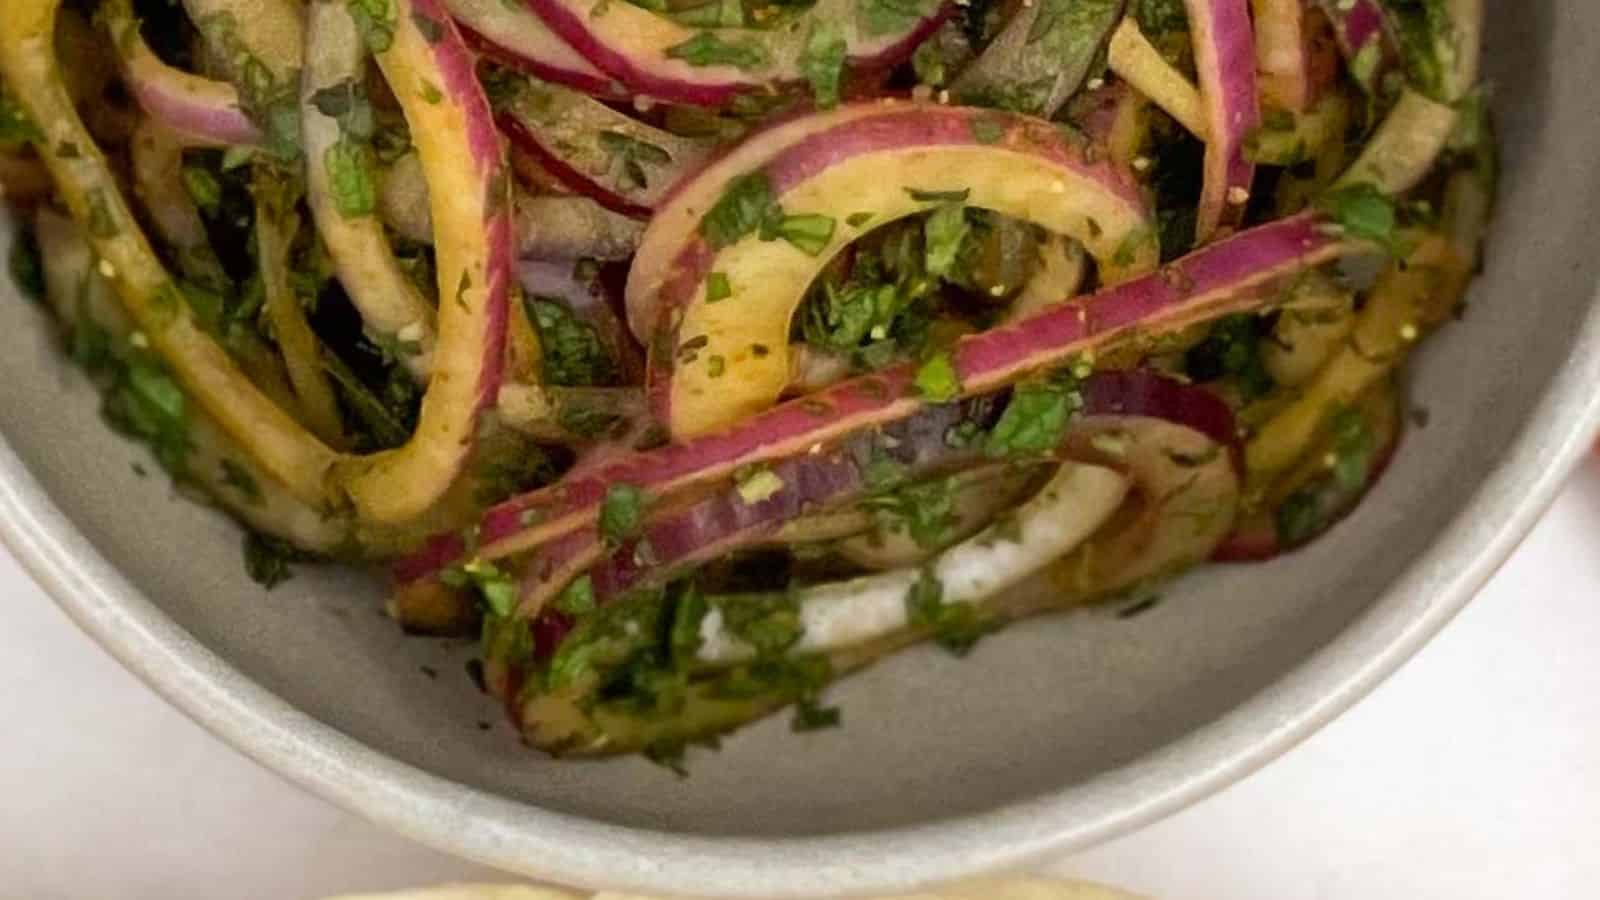 A bowl of red onion and cilantro salad on a table.